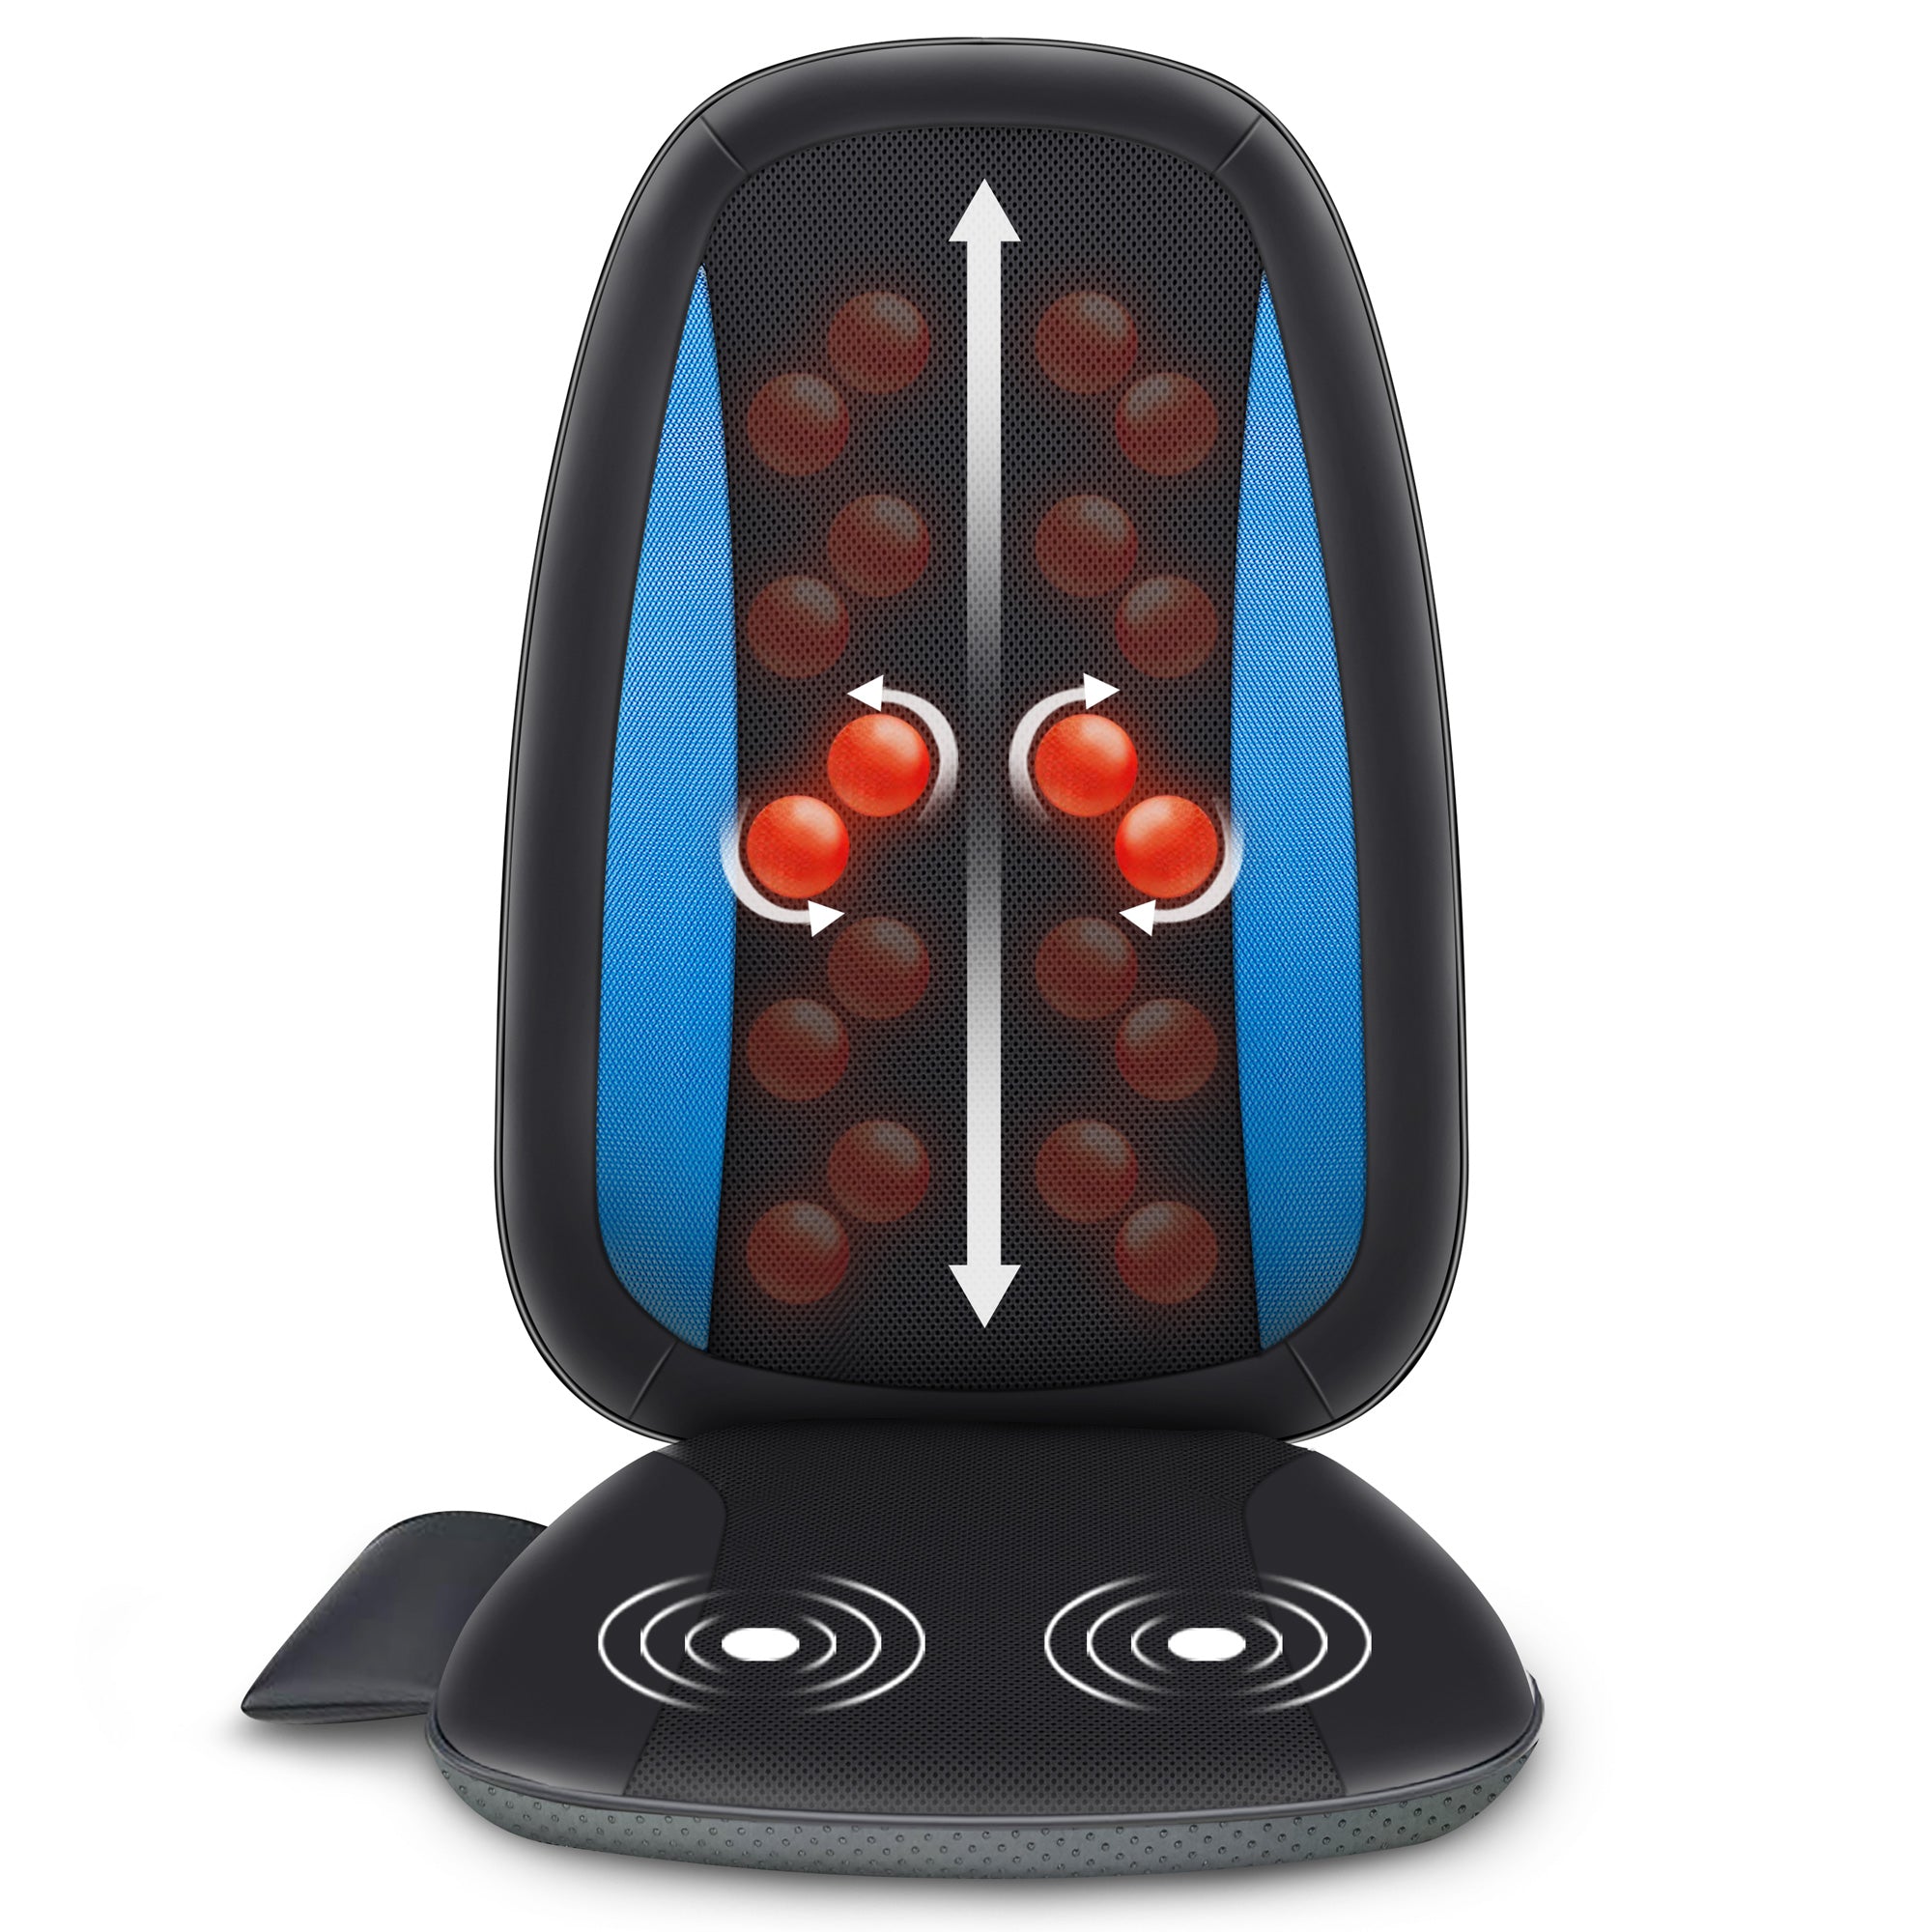 Cotsoco Shiatsu Massage Cushion with Heat, Full Back Massager with  Vibration,Deep Kneading Rolling Massage Chair Pad for Waist,Hips,Muscle  Pain Relief,Use at Home/Office 